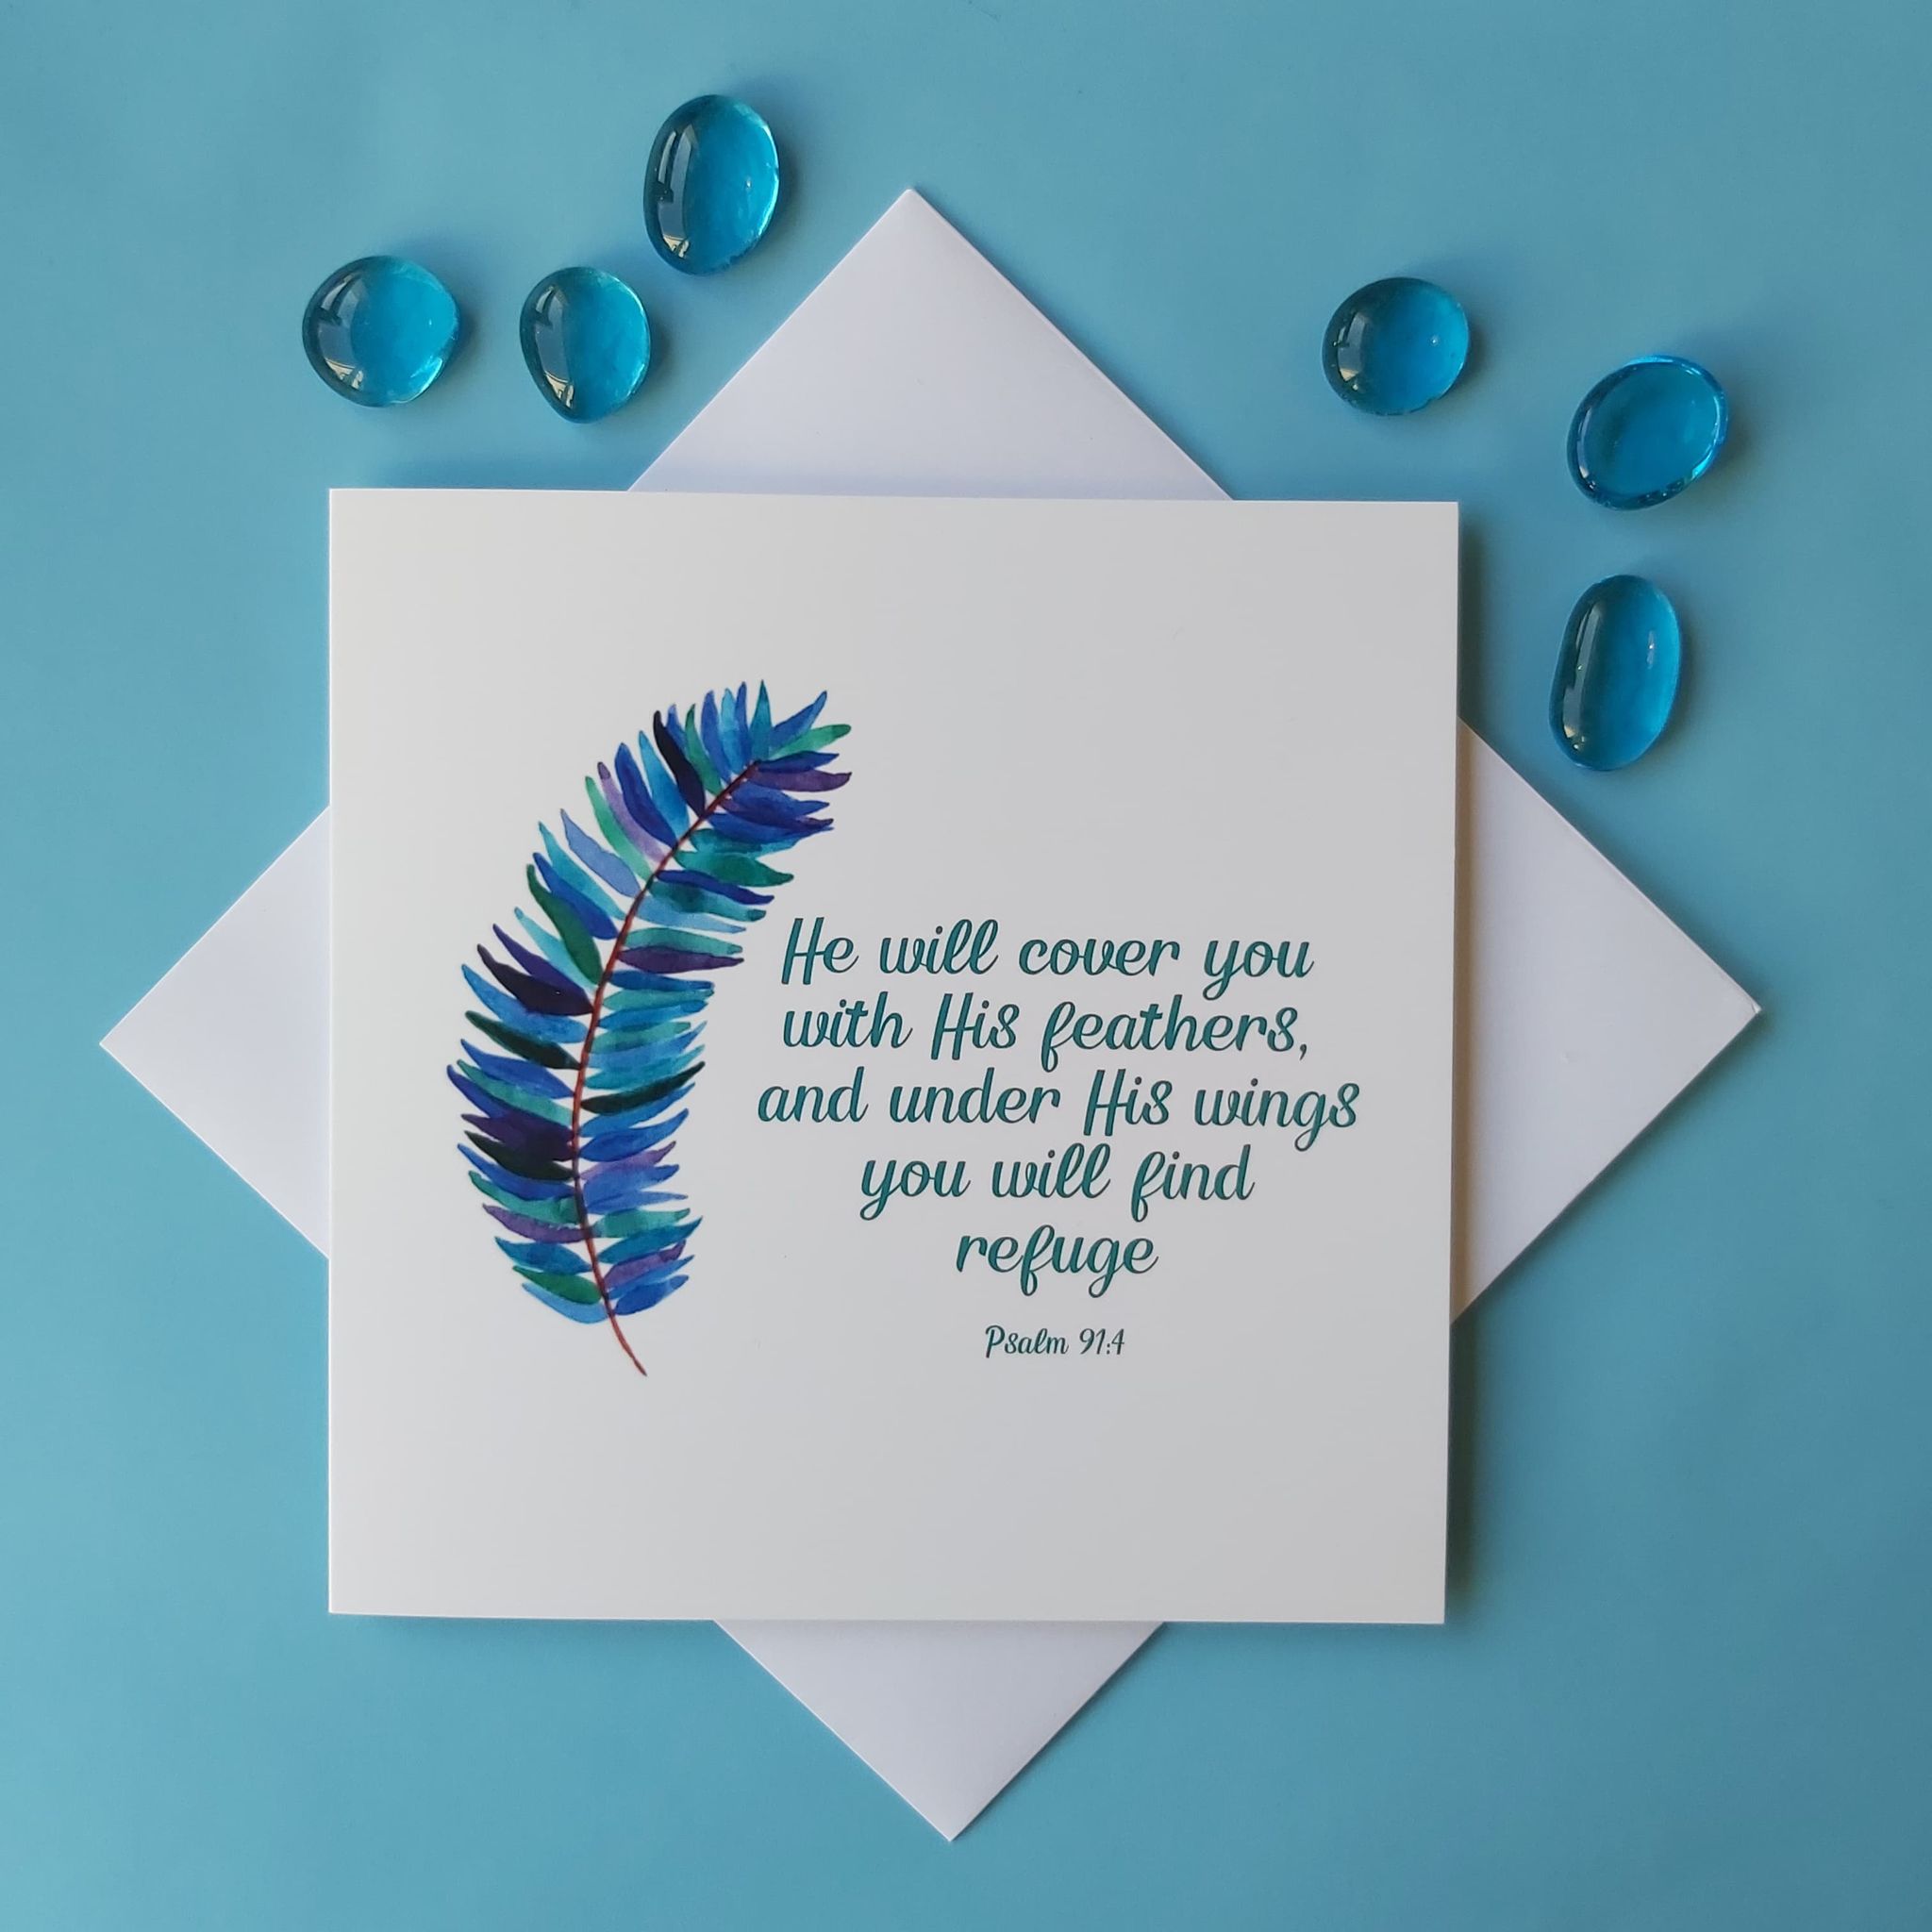 He will cover you with His feathers - Psalm 91:4. Blue watercolour feather design with teal text.